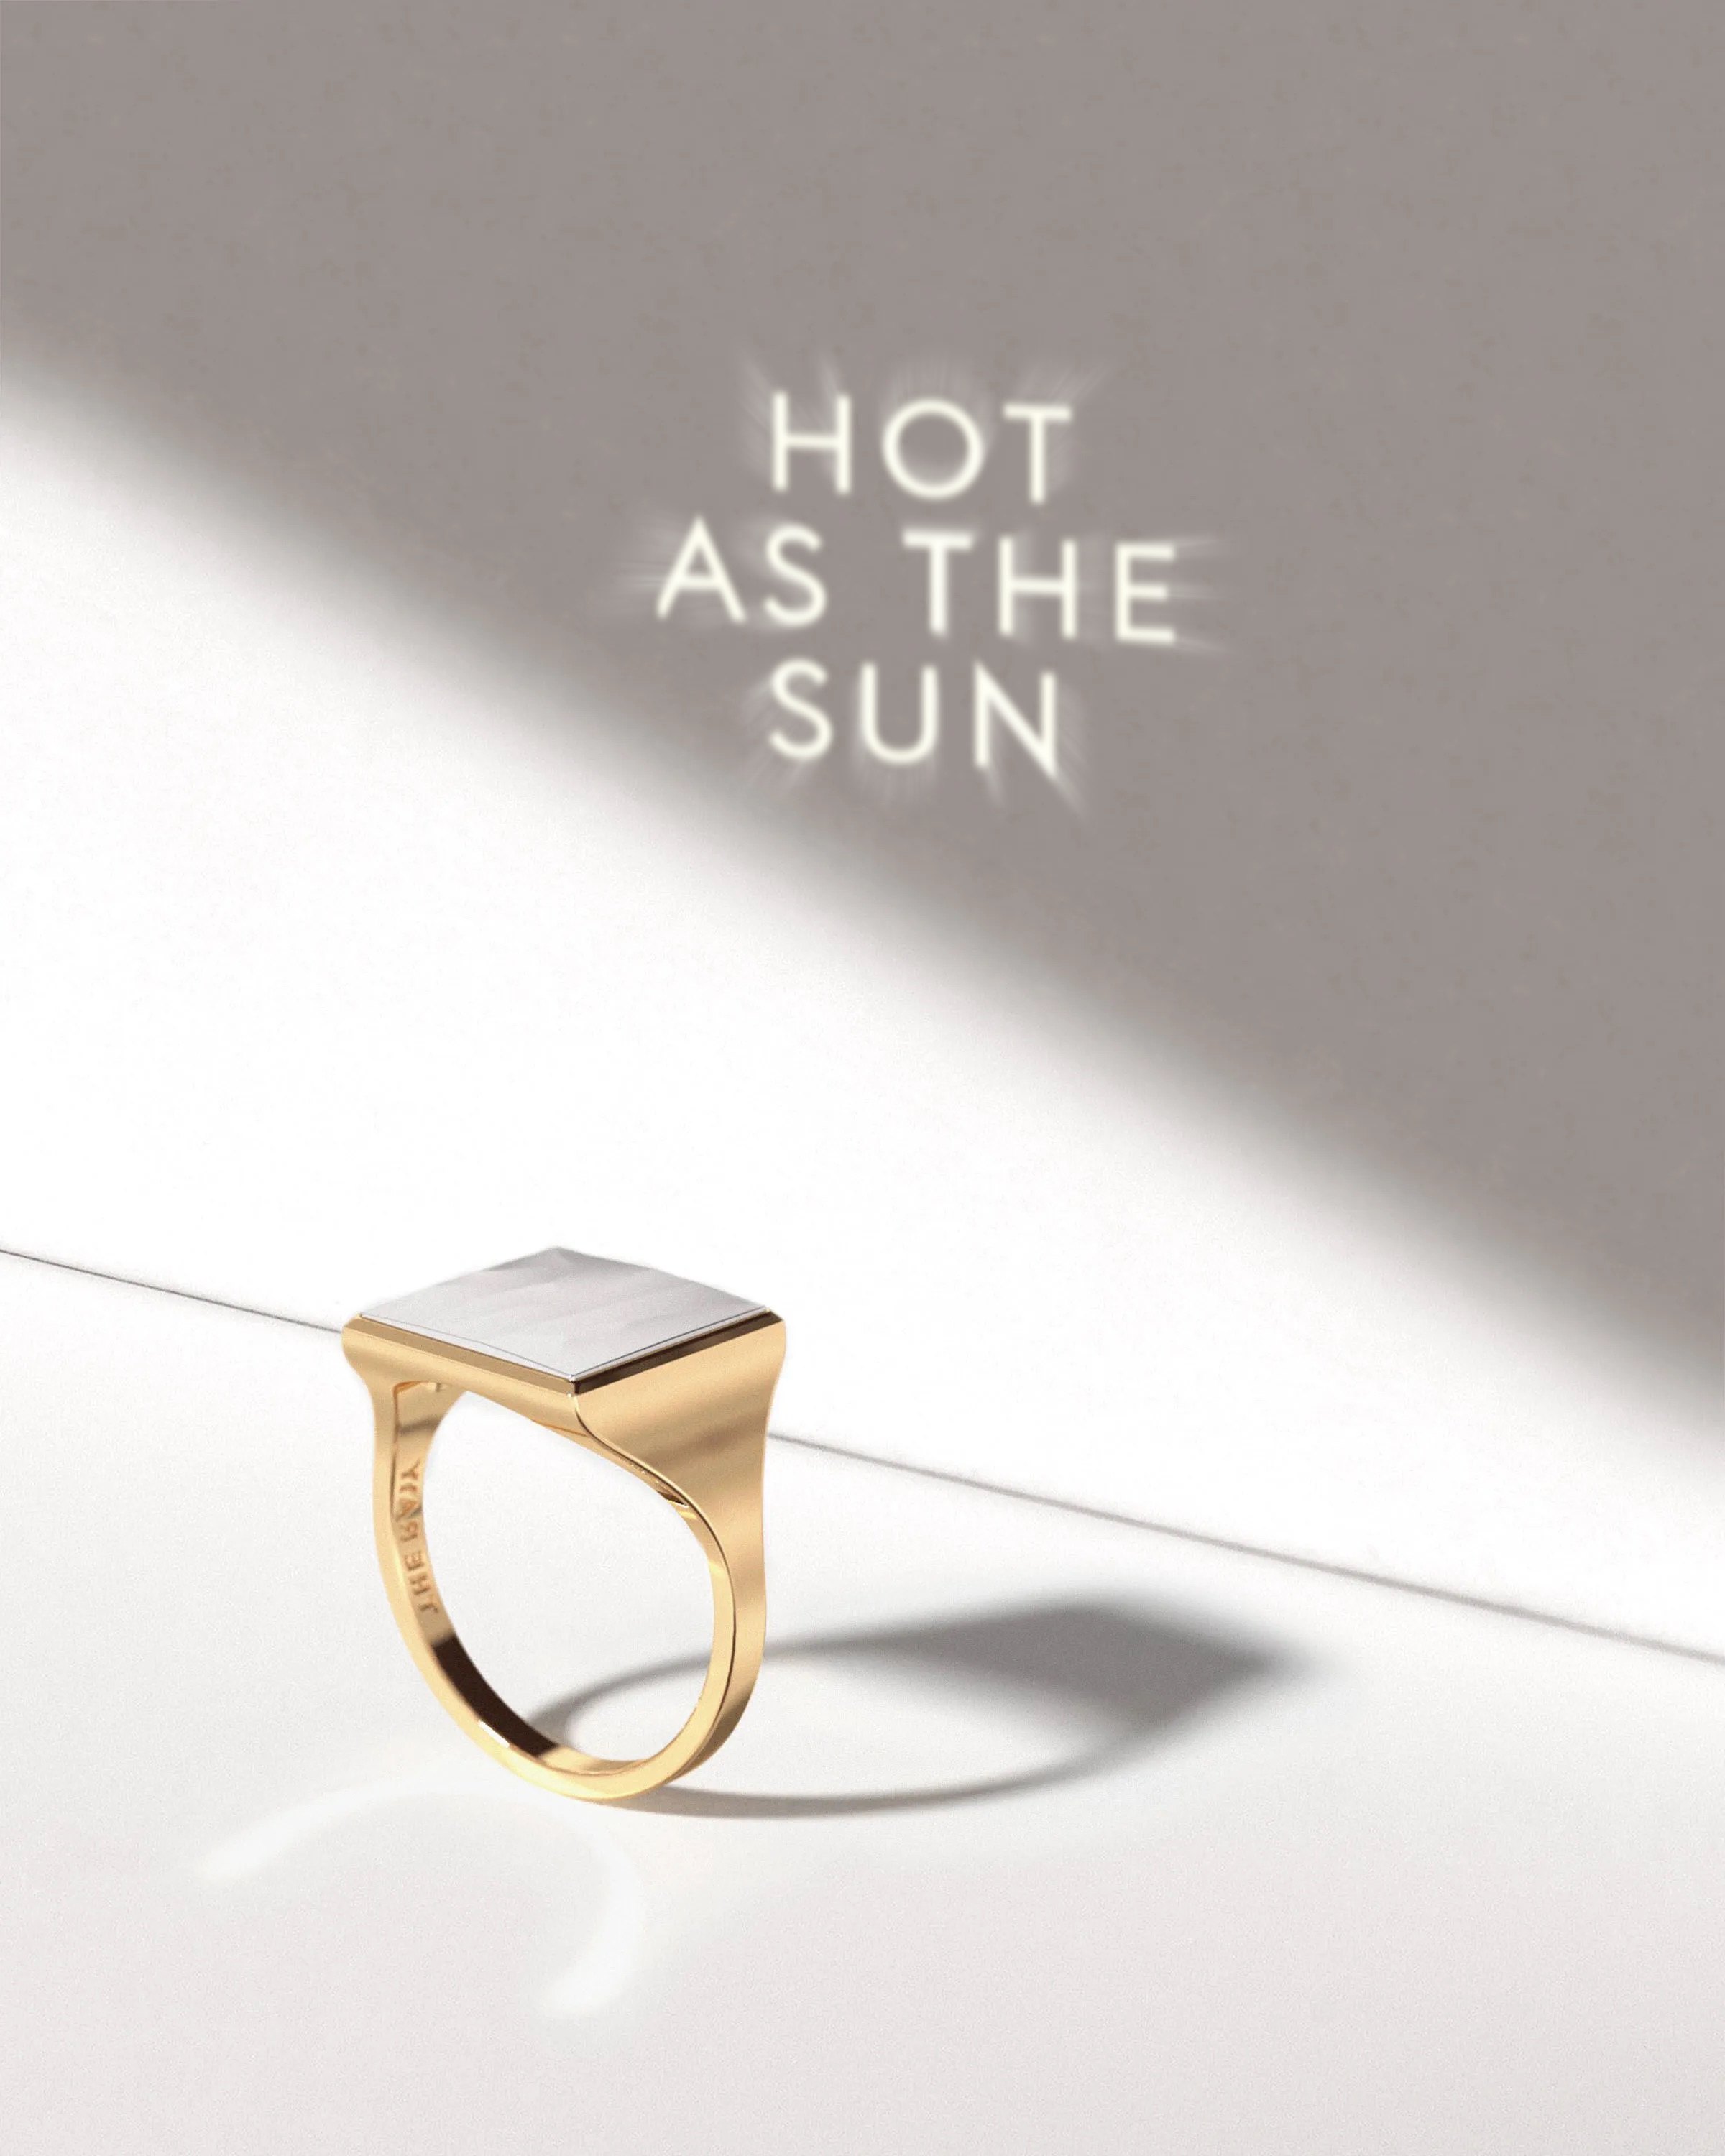 18k Recycled Gold Signet Ring with your Secret Message in Light